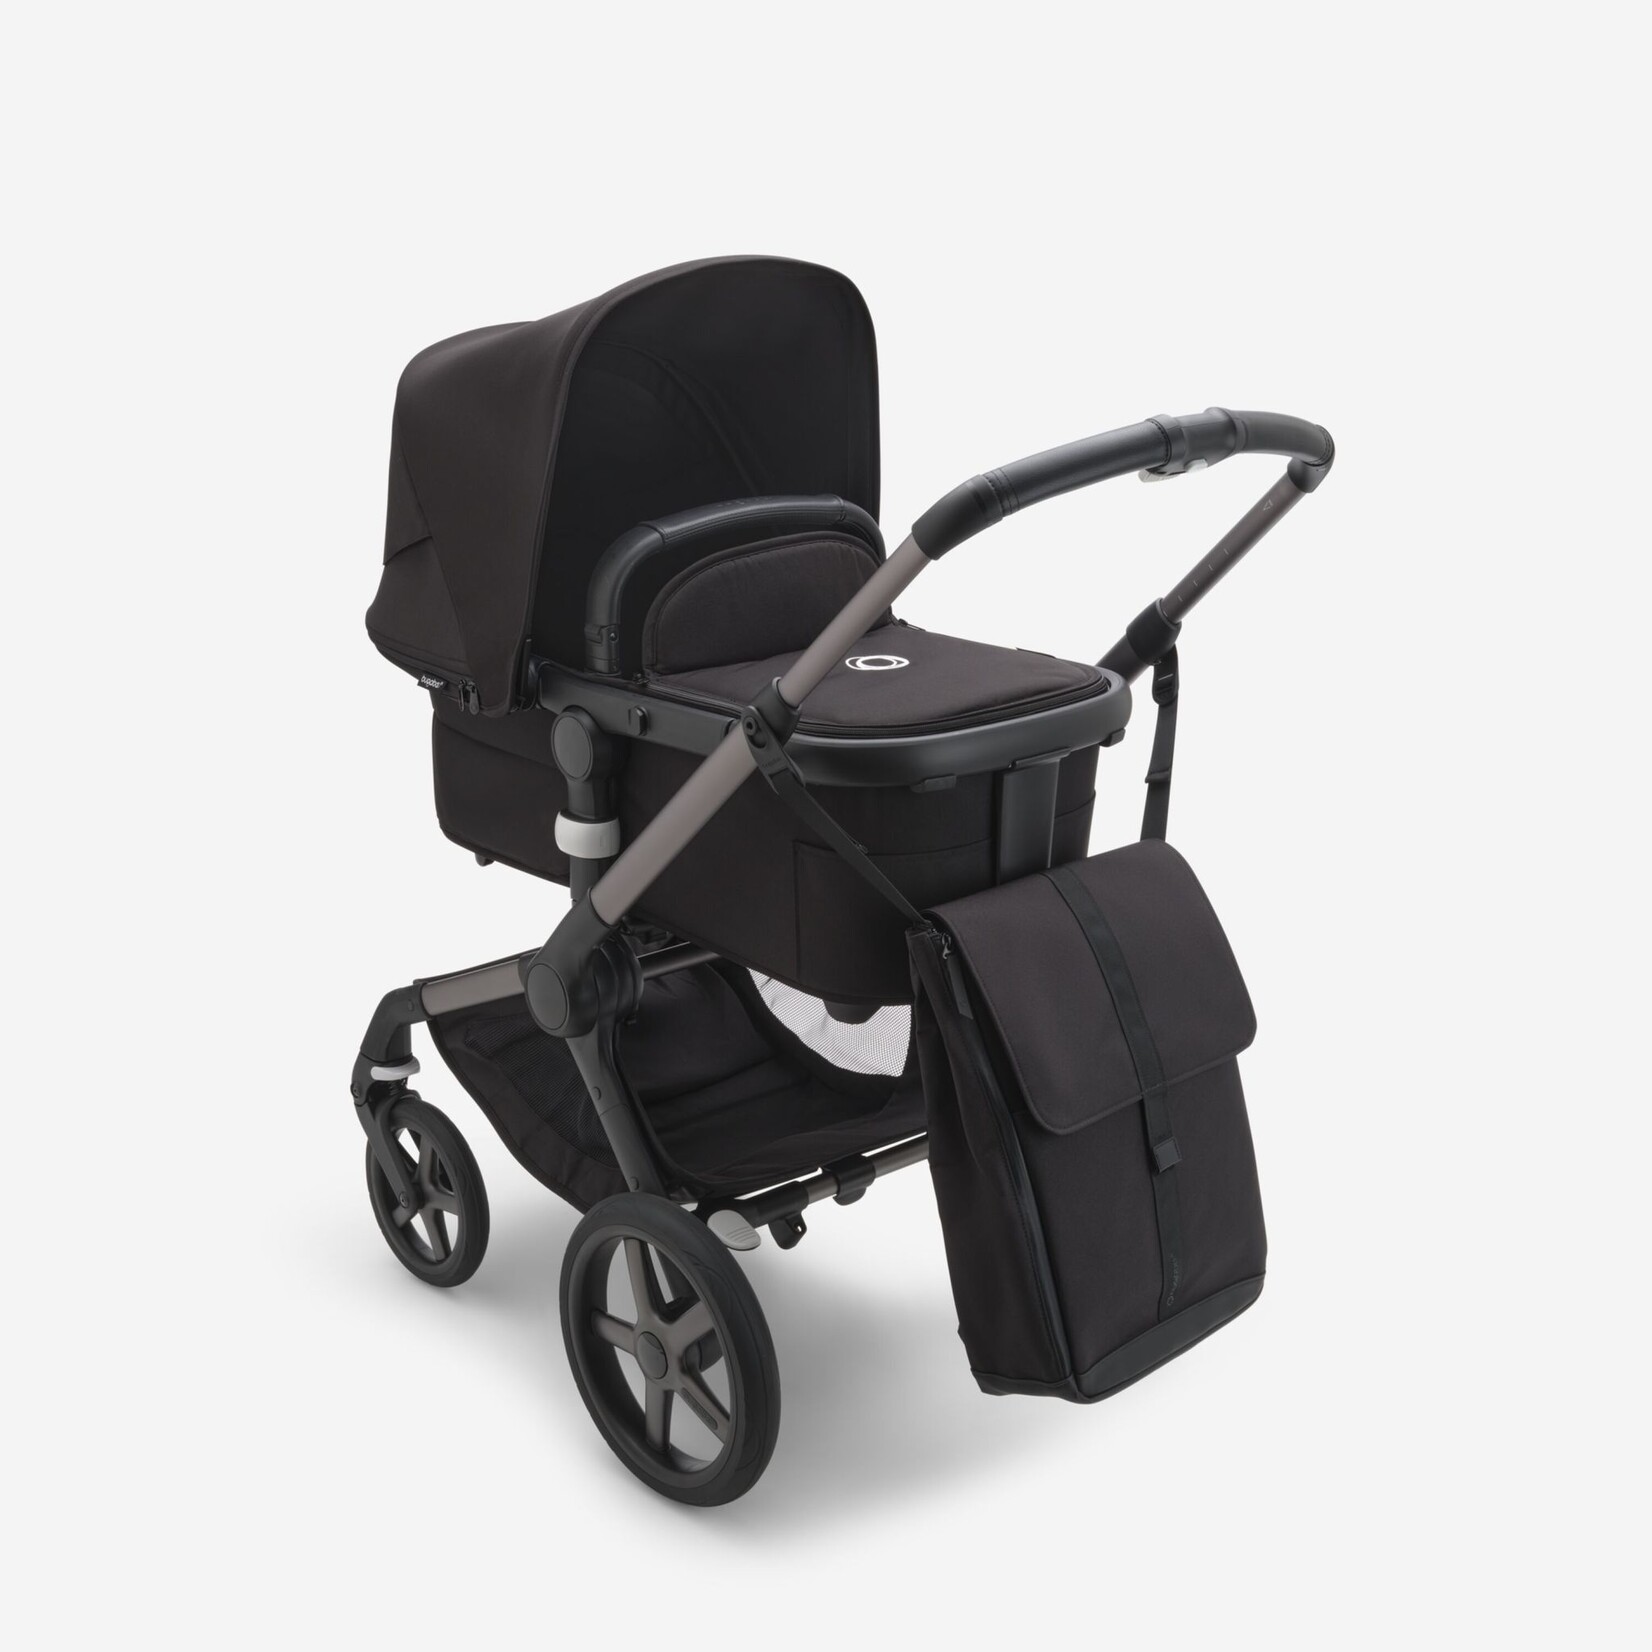 Bugaboo changing backpack-Midnight black